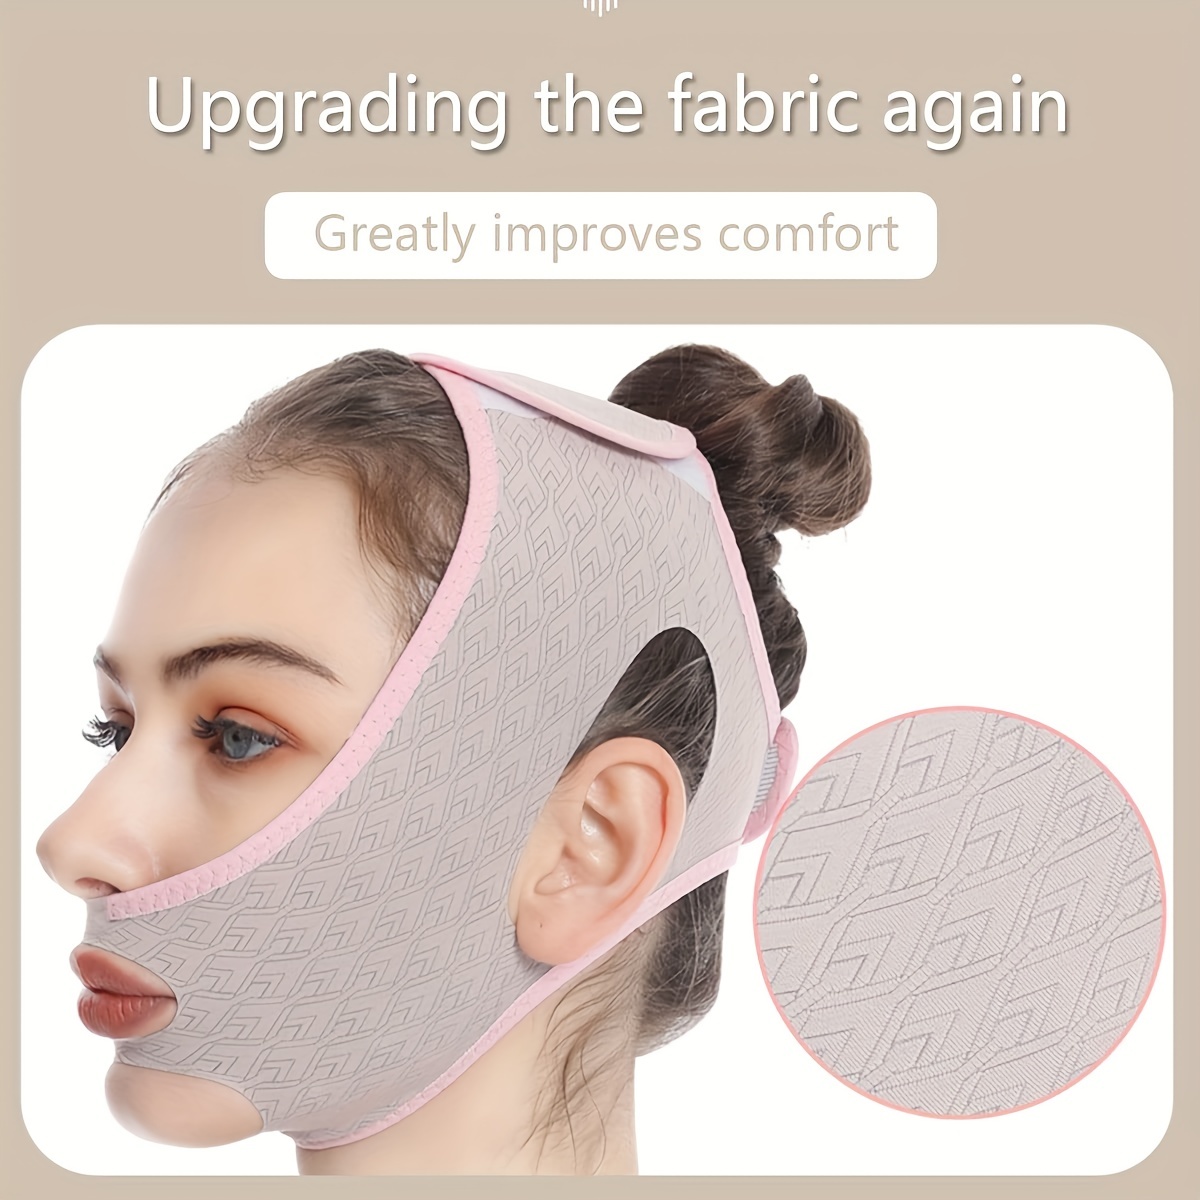 Beauty Face Sculpting Sleep Mask, V Line Lifting Face-belt Chin Strap,  Double Chin Reducer for Women and Men Tightening（2PCS） 